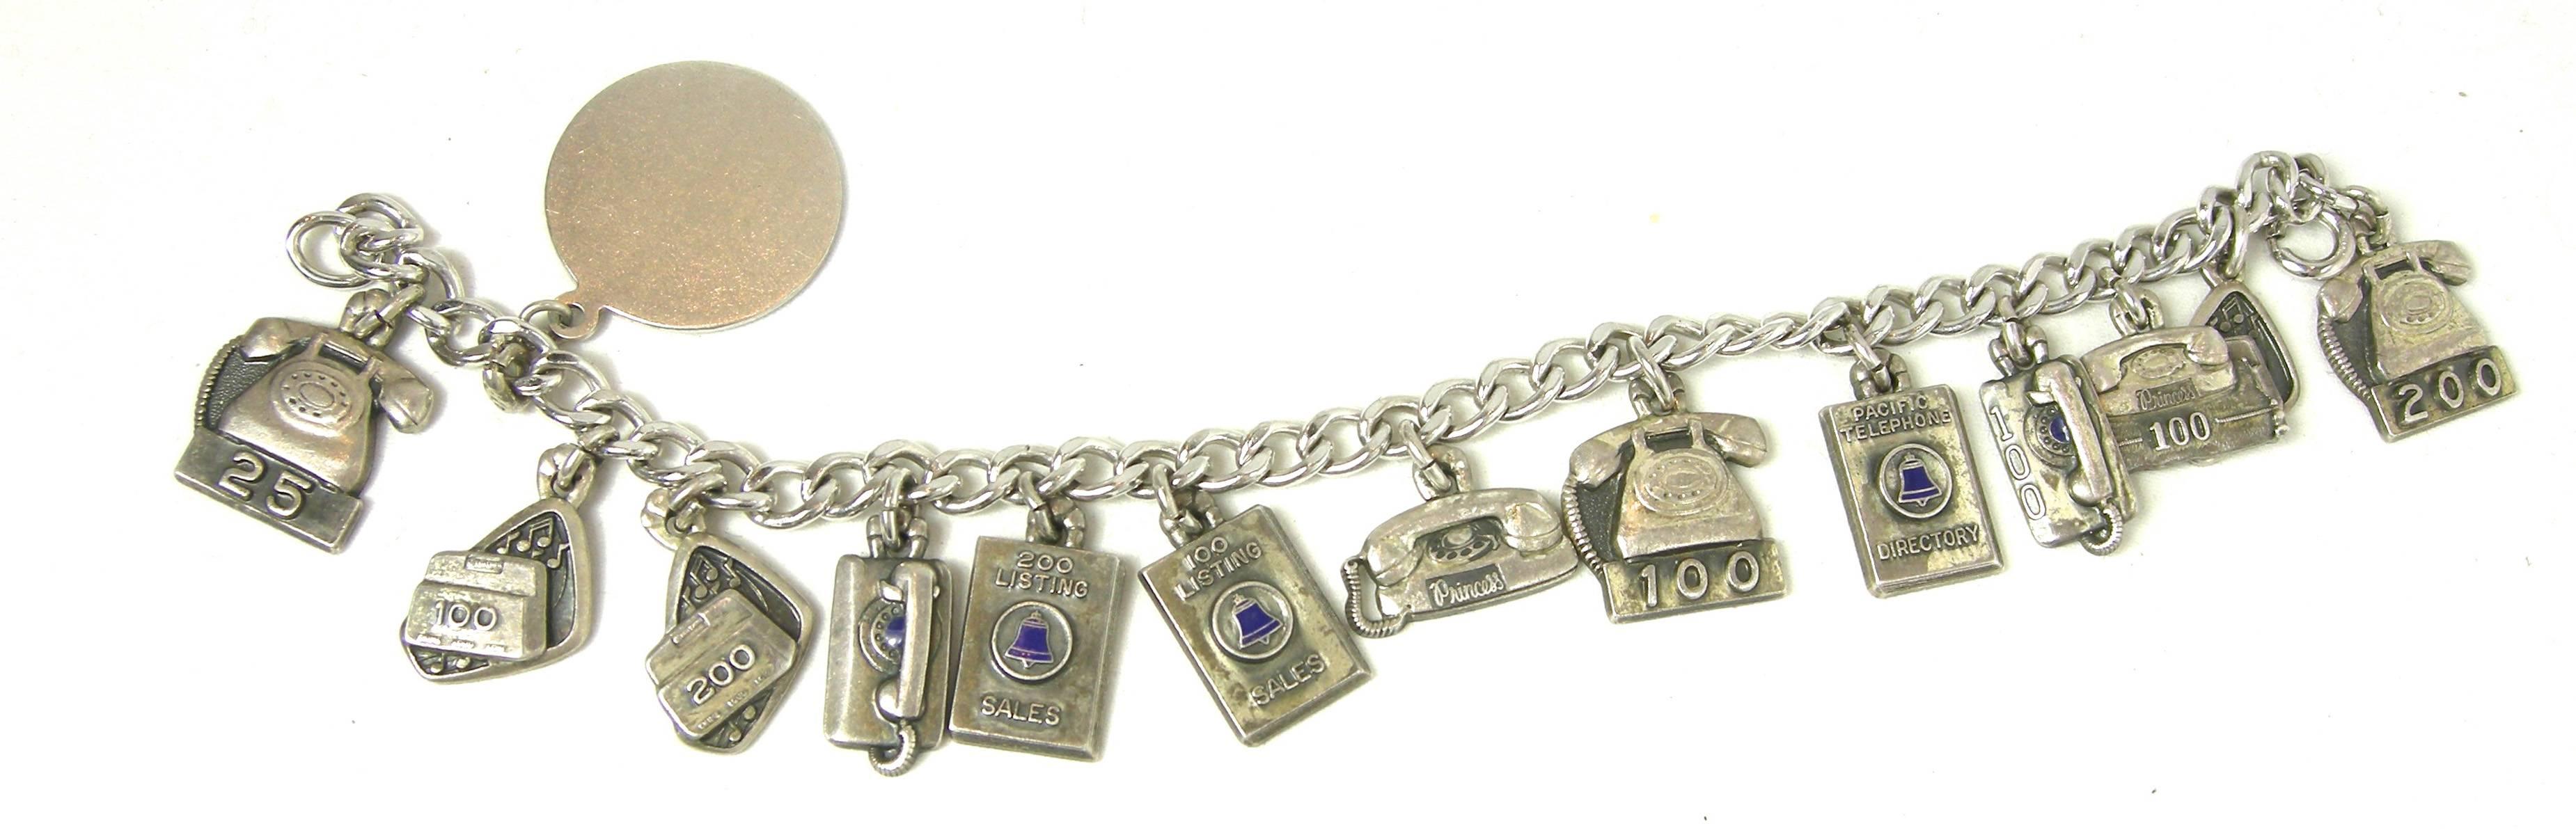 This is a rare collection of silver charms that had to take many years to put together.  The bracelet has a sterling silver open link chain with 13 sterling silver telephone charms.  Each phone depicts different a different time period when these